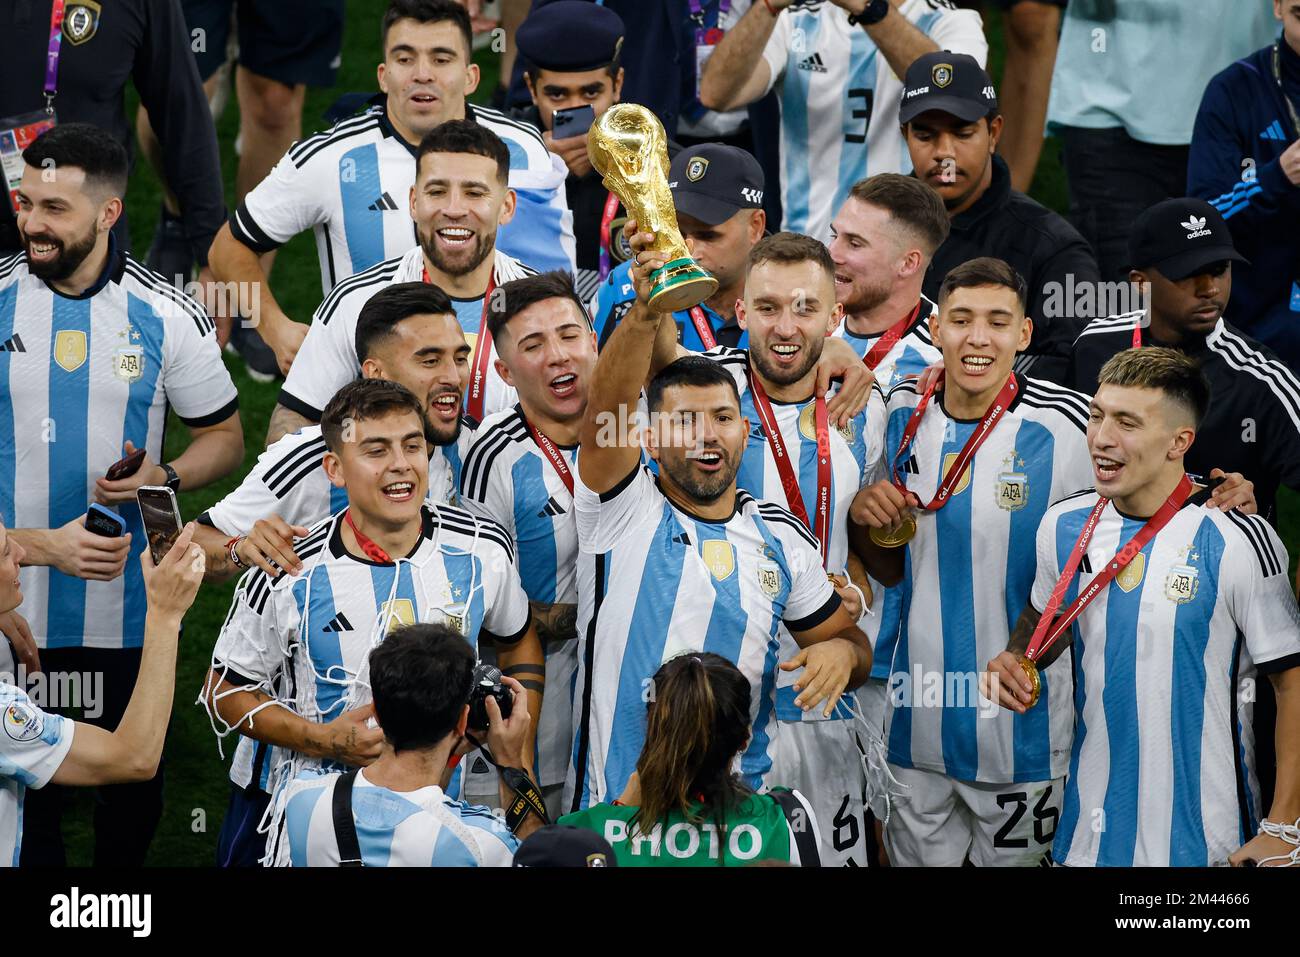 Lusail, Catar. 18th Dec, 2022. Sergio Aguero with the Qatar 2022 FIFA World Cup trophy during the medal ceremony after the match between Argentina v France valid for the 2022 FIFA World Cup final held at the Lusail International Stadium, AD, Qatar Credit: Rodolfo Buhrer/La Imagem/FotoArena/Alamy Live News Stock Photo